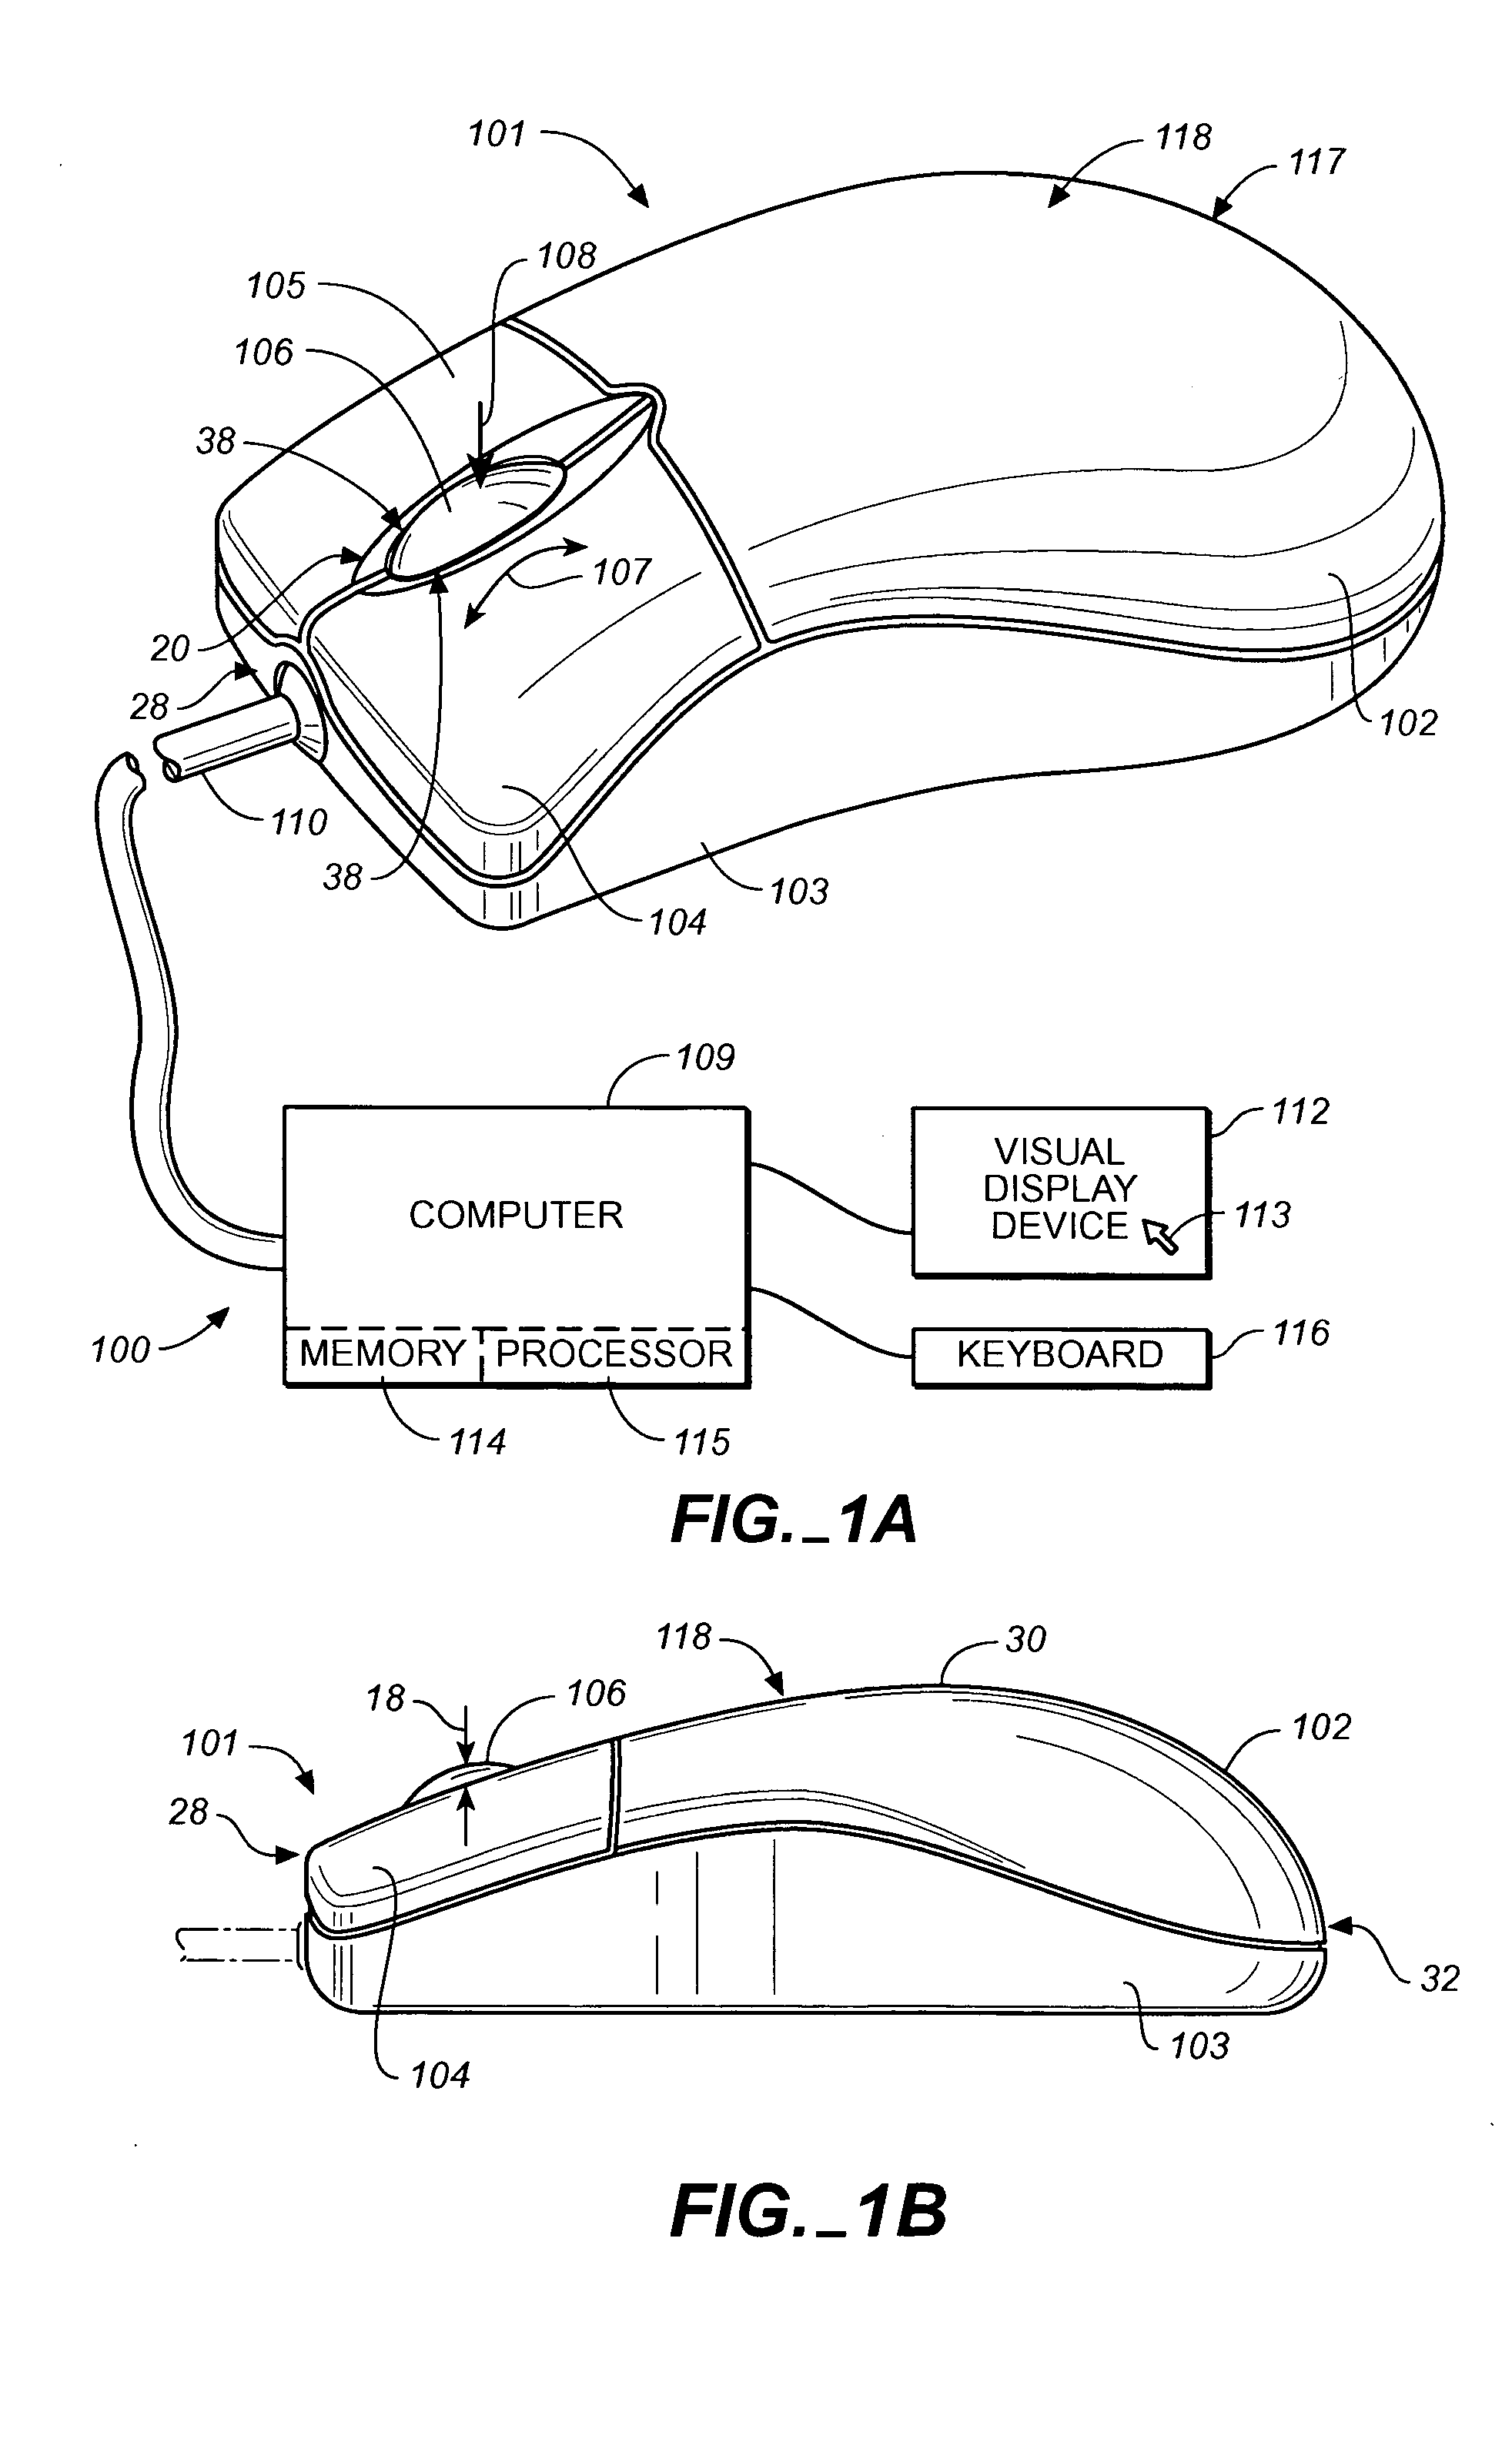 System and method of adjusting display characteristics of a displayable data file using a ergonomic computer input device